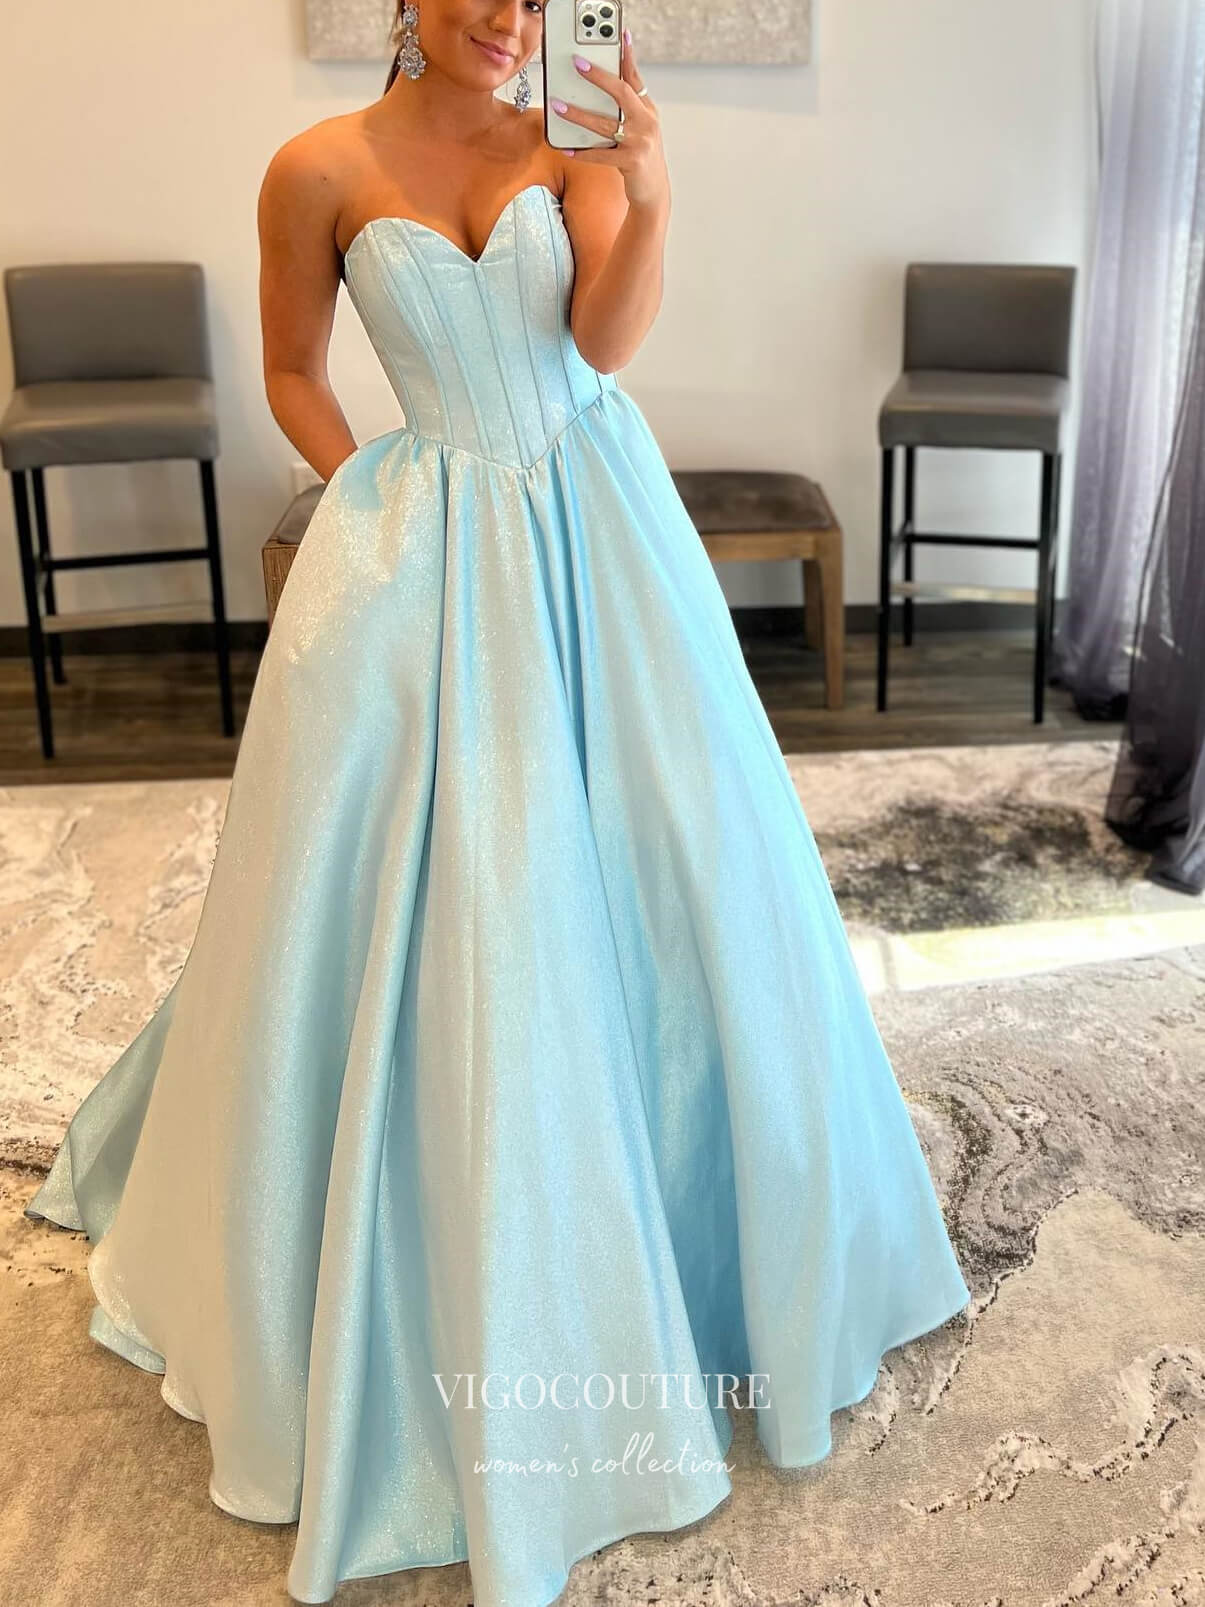 vigocouture-Light Blue Sweetheart Neck Prom Dresses With Pockets Sparkly Satin Evening Dresses 21567-Prom Dresses-vigocouture-